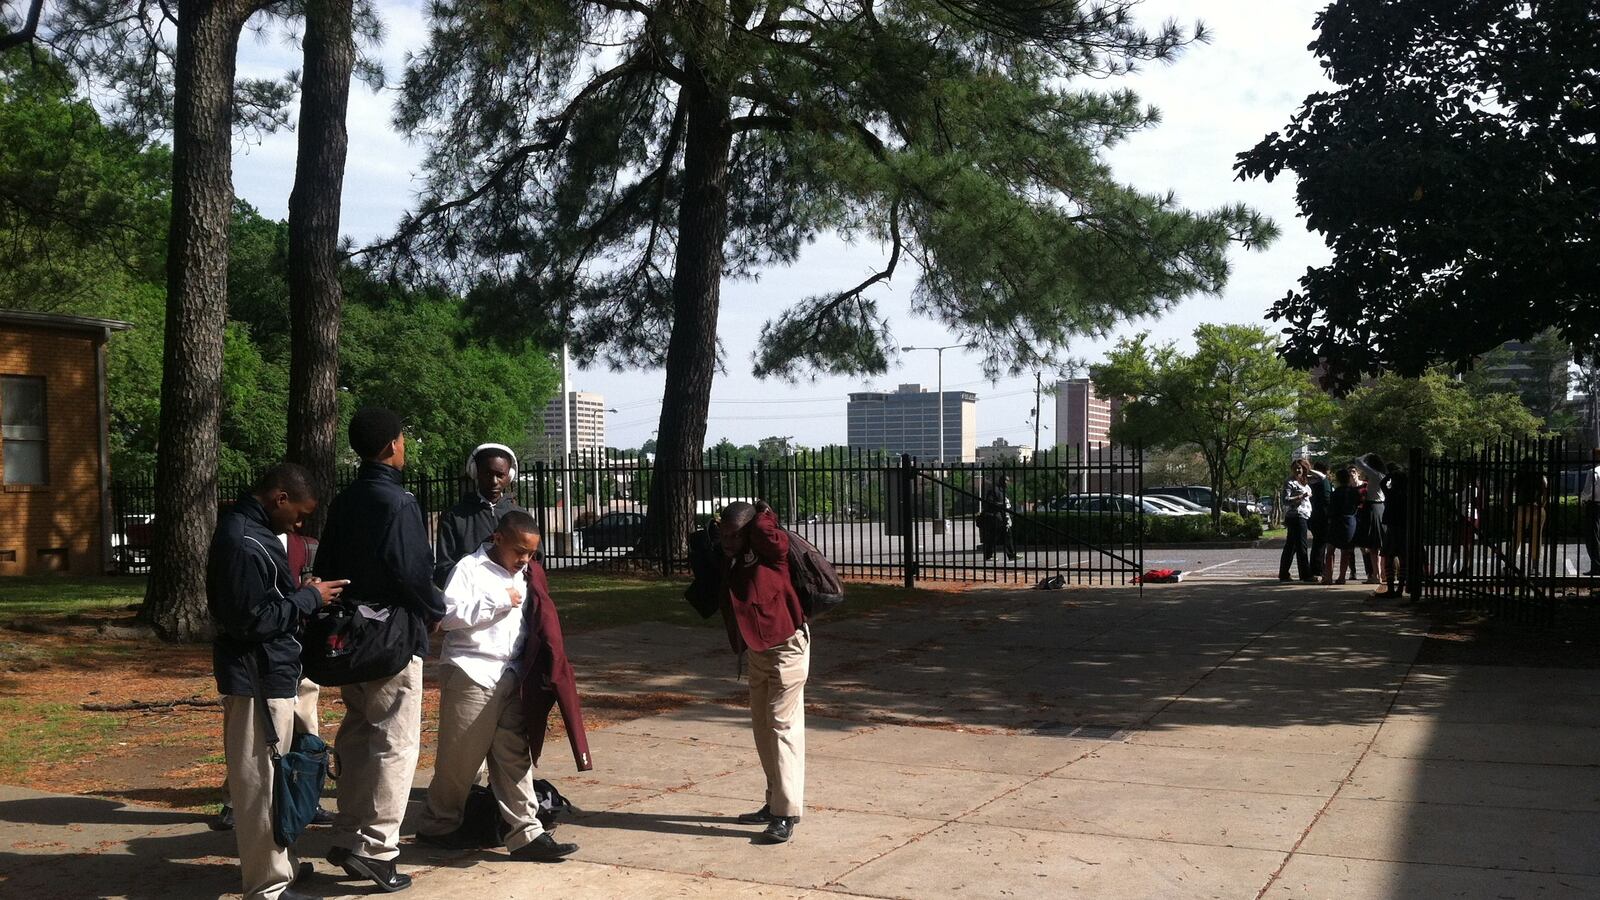 Students leave the Memphis Academy of Science and Engineering during state testing week in 2014. The school is on the state's priority list and would be eligible for turnaround initiated by parents if a "parent trigger" bill becomes law through the Tennessee General Assembly.